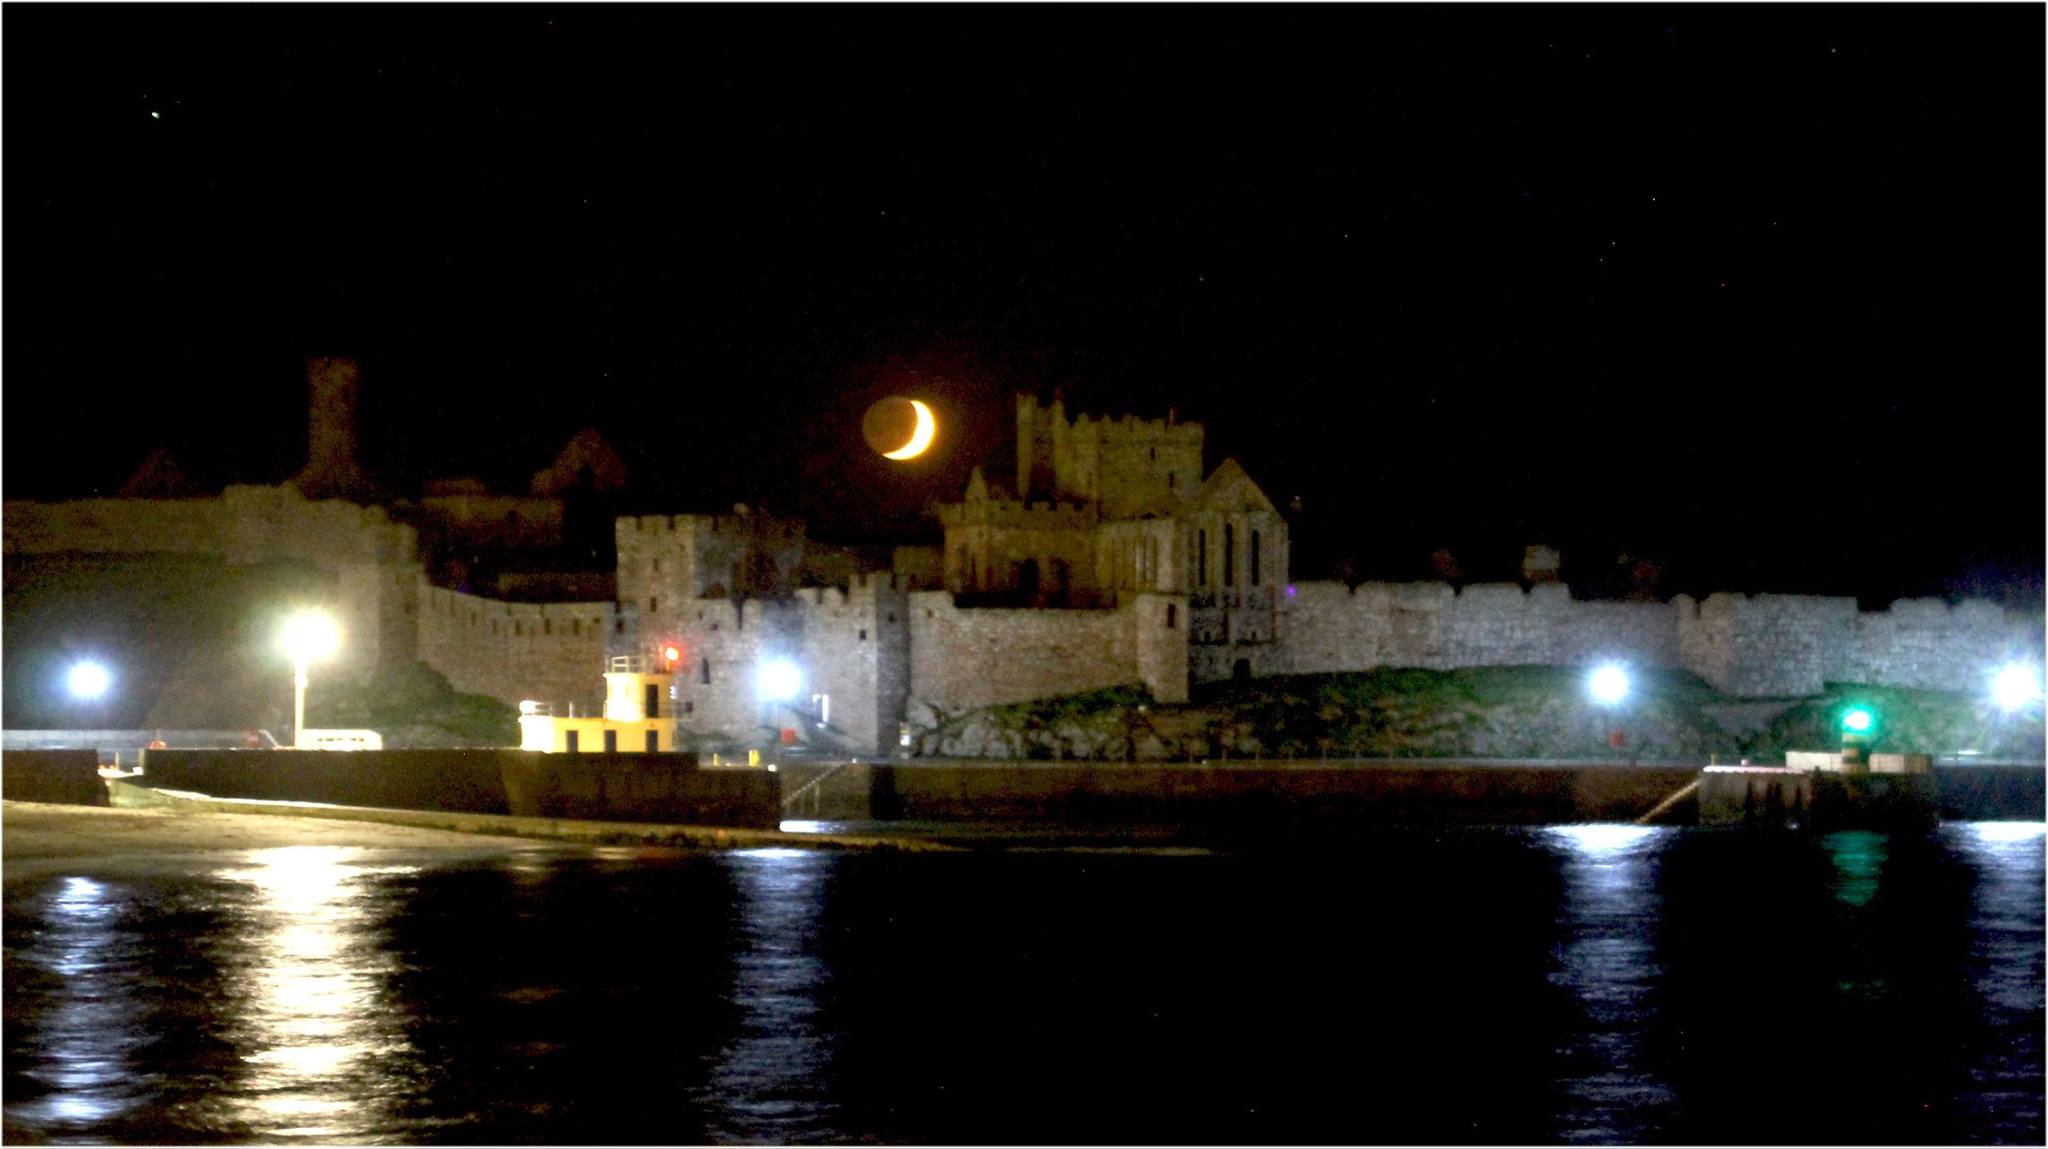 Last of the moon over the castle, by Dave Corkish